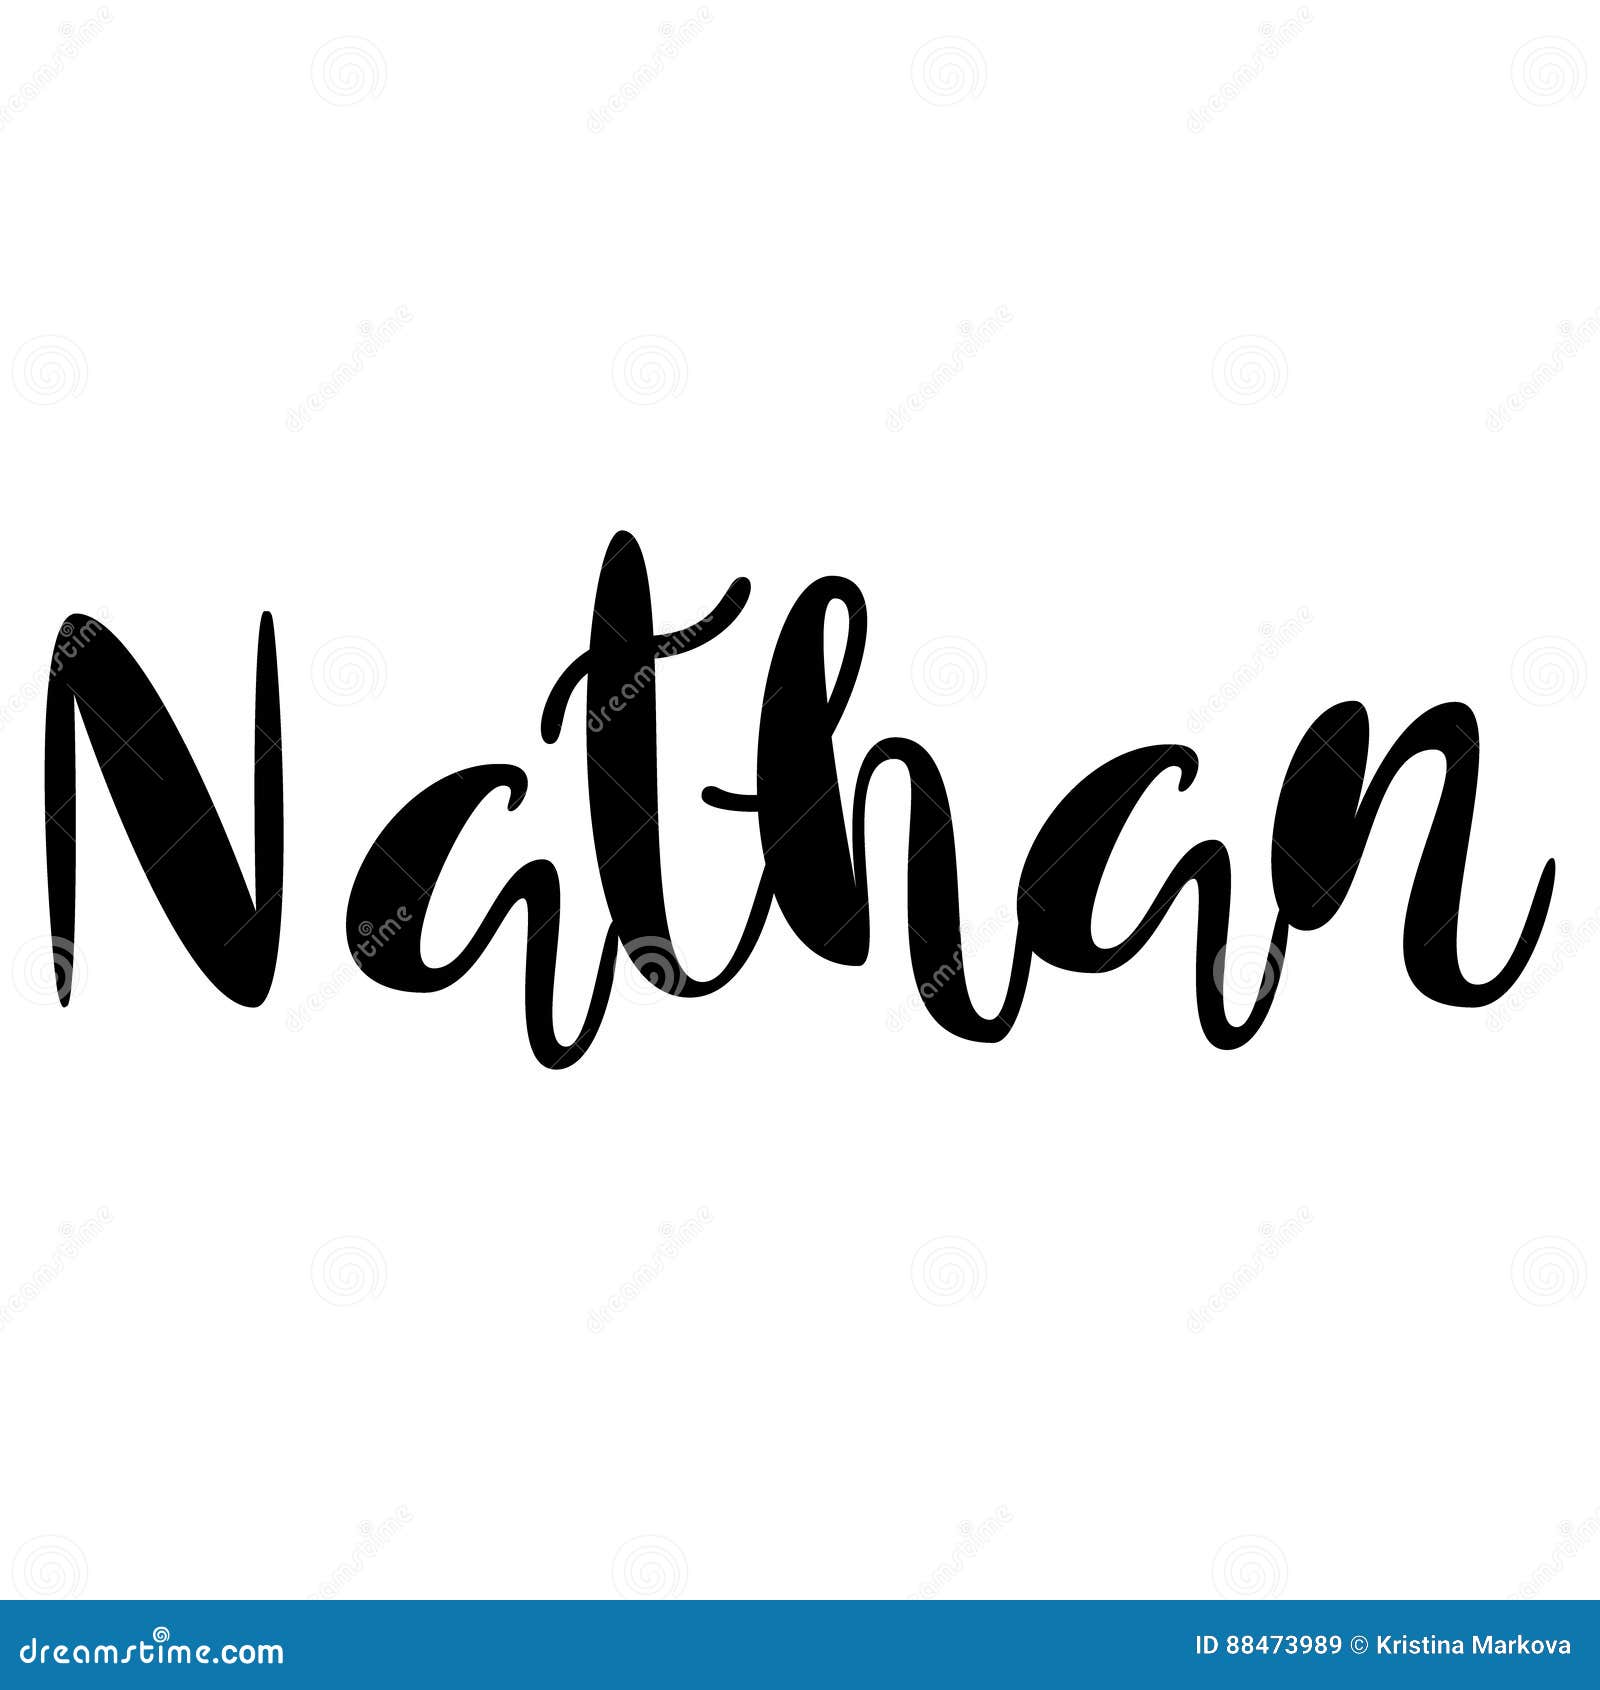 All 97+ Images how to write nathan in cursive Completed